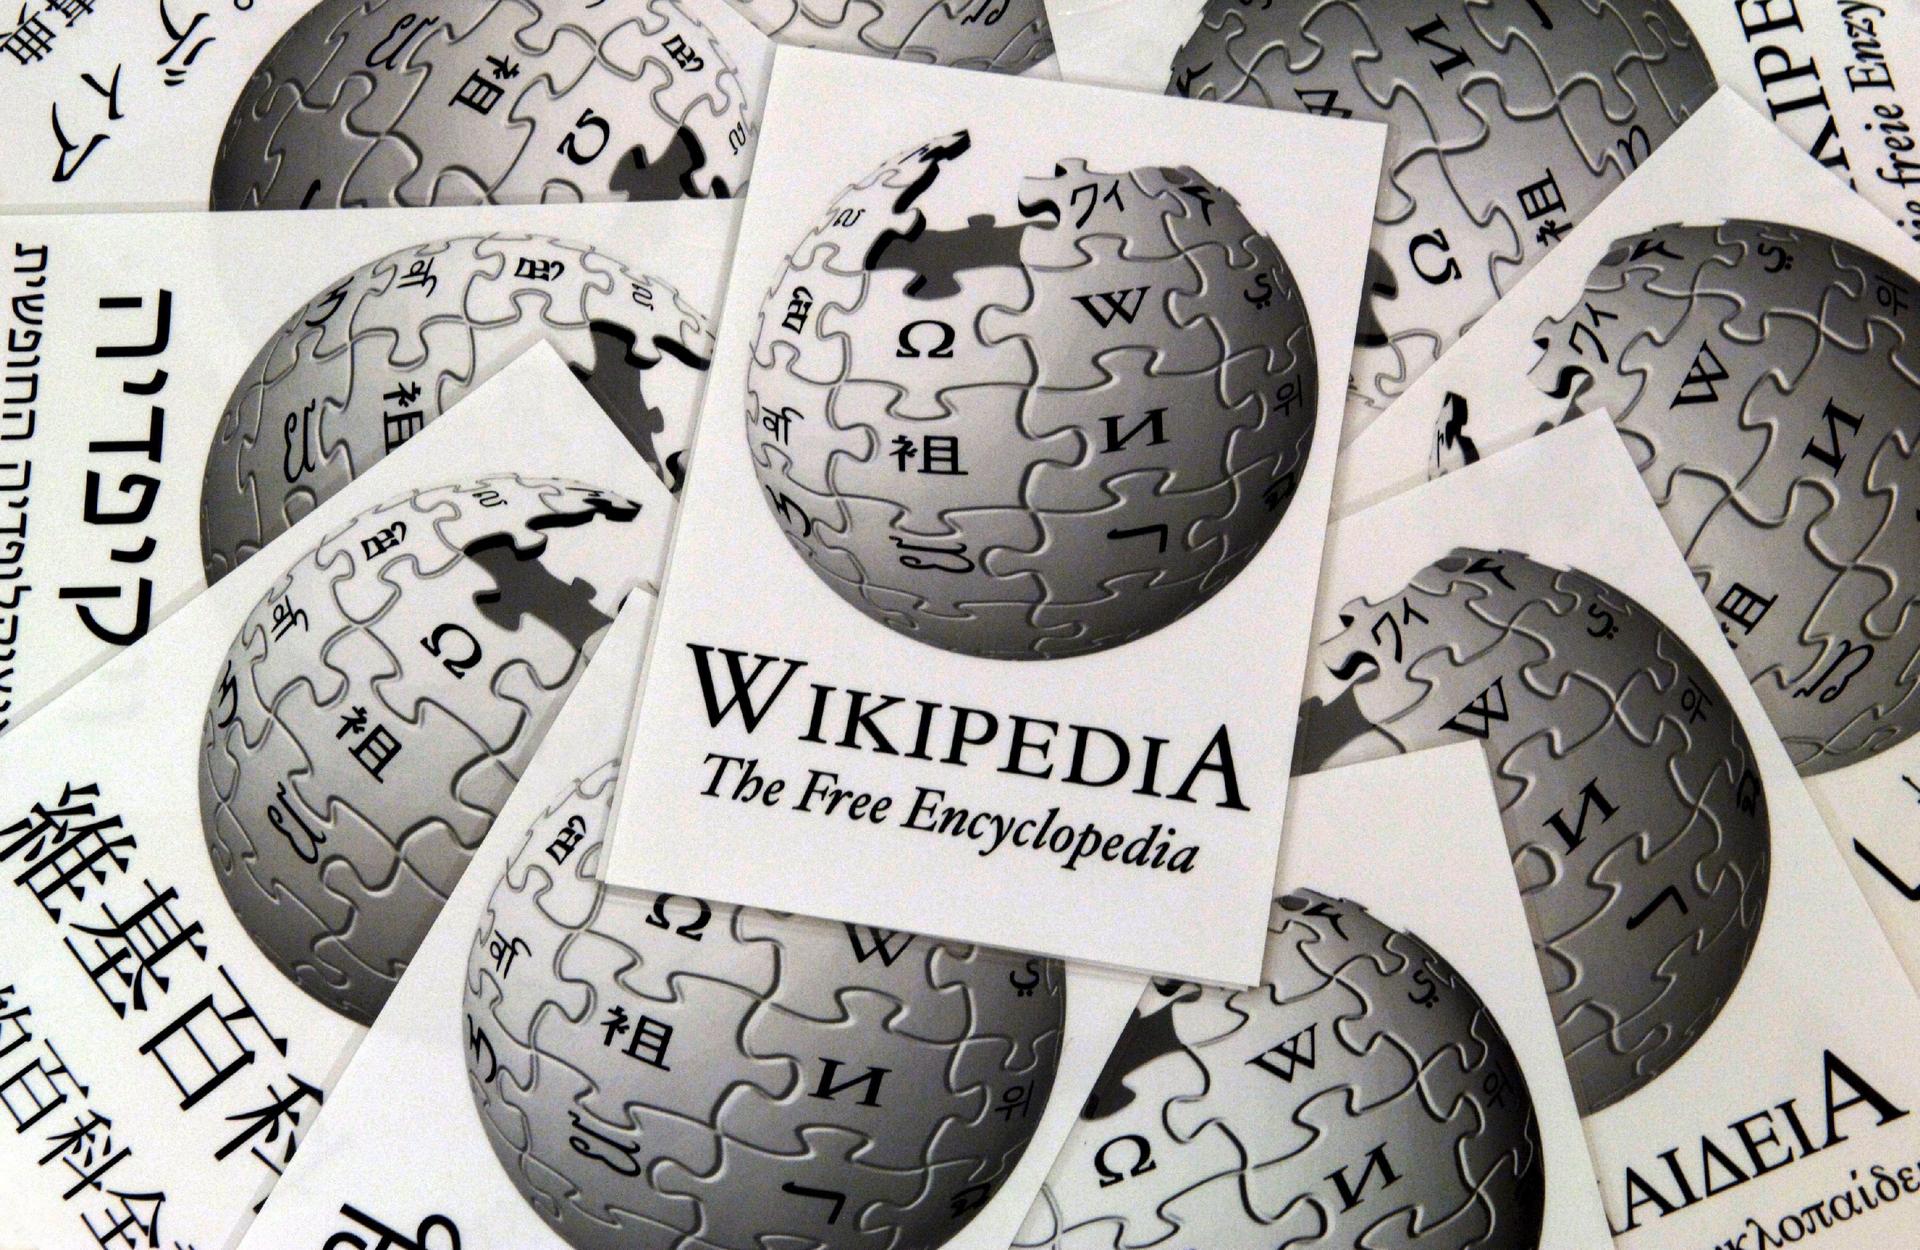 Wikipedia is a movement, not just an encyclopedia.